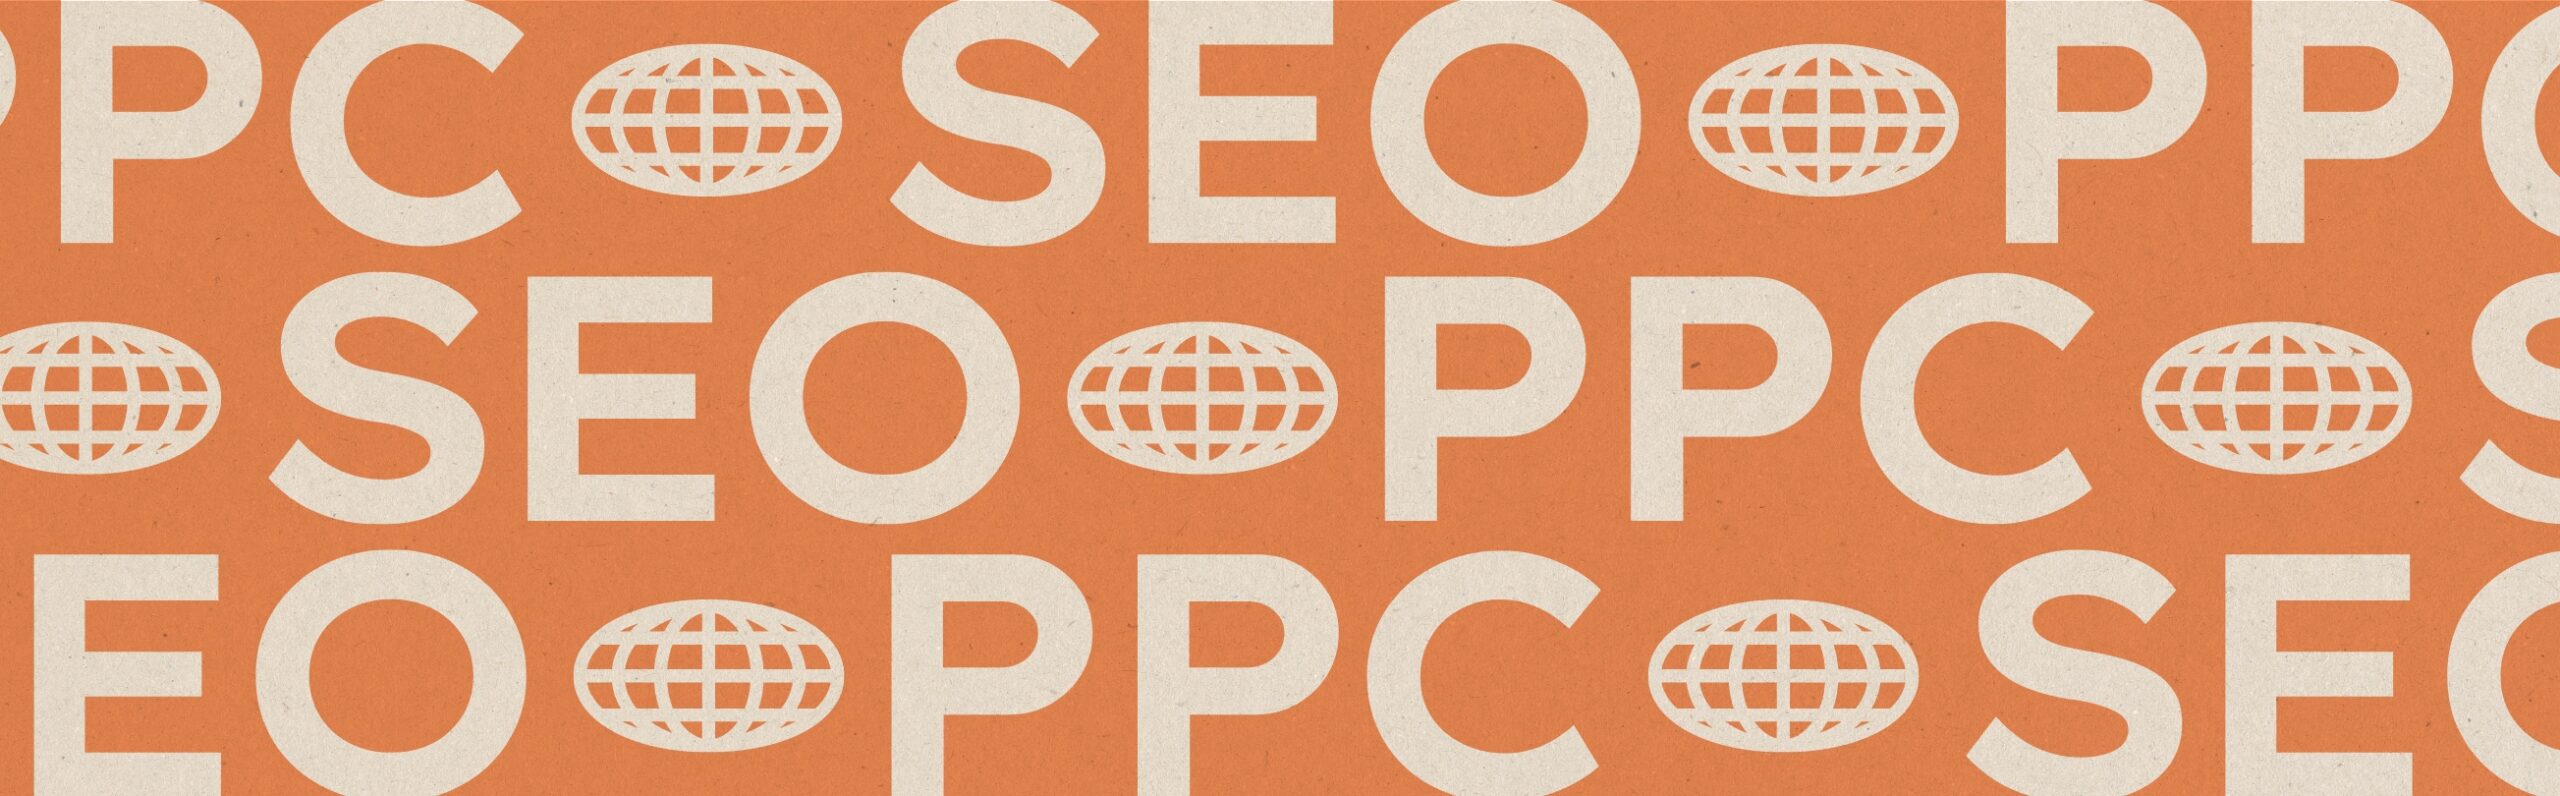 The Benefits of Combining SEO and PPC in Your Digital Marketing Strategy